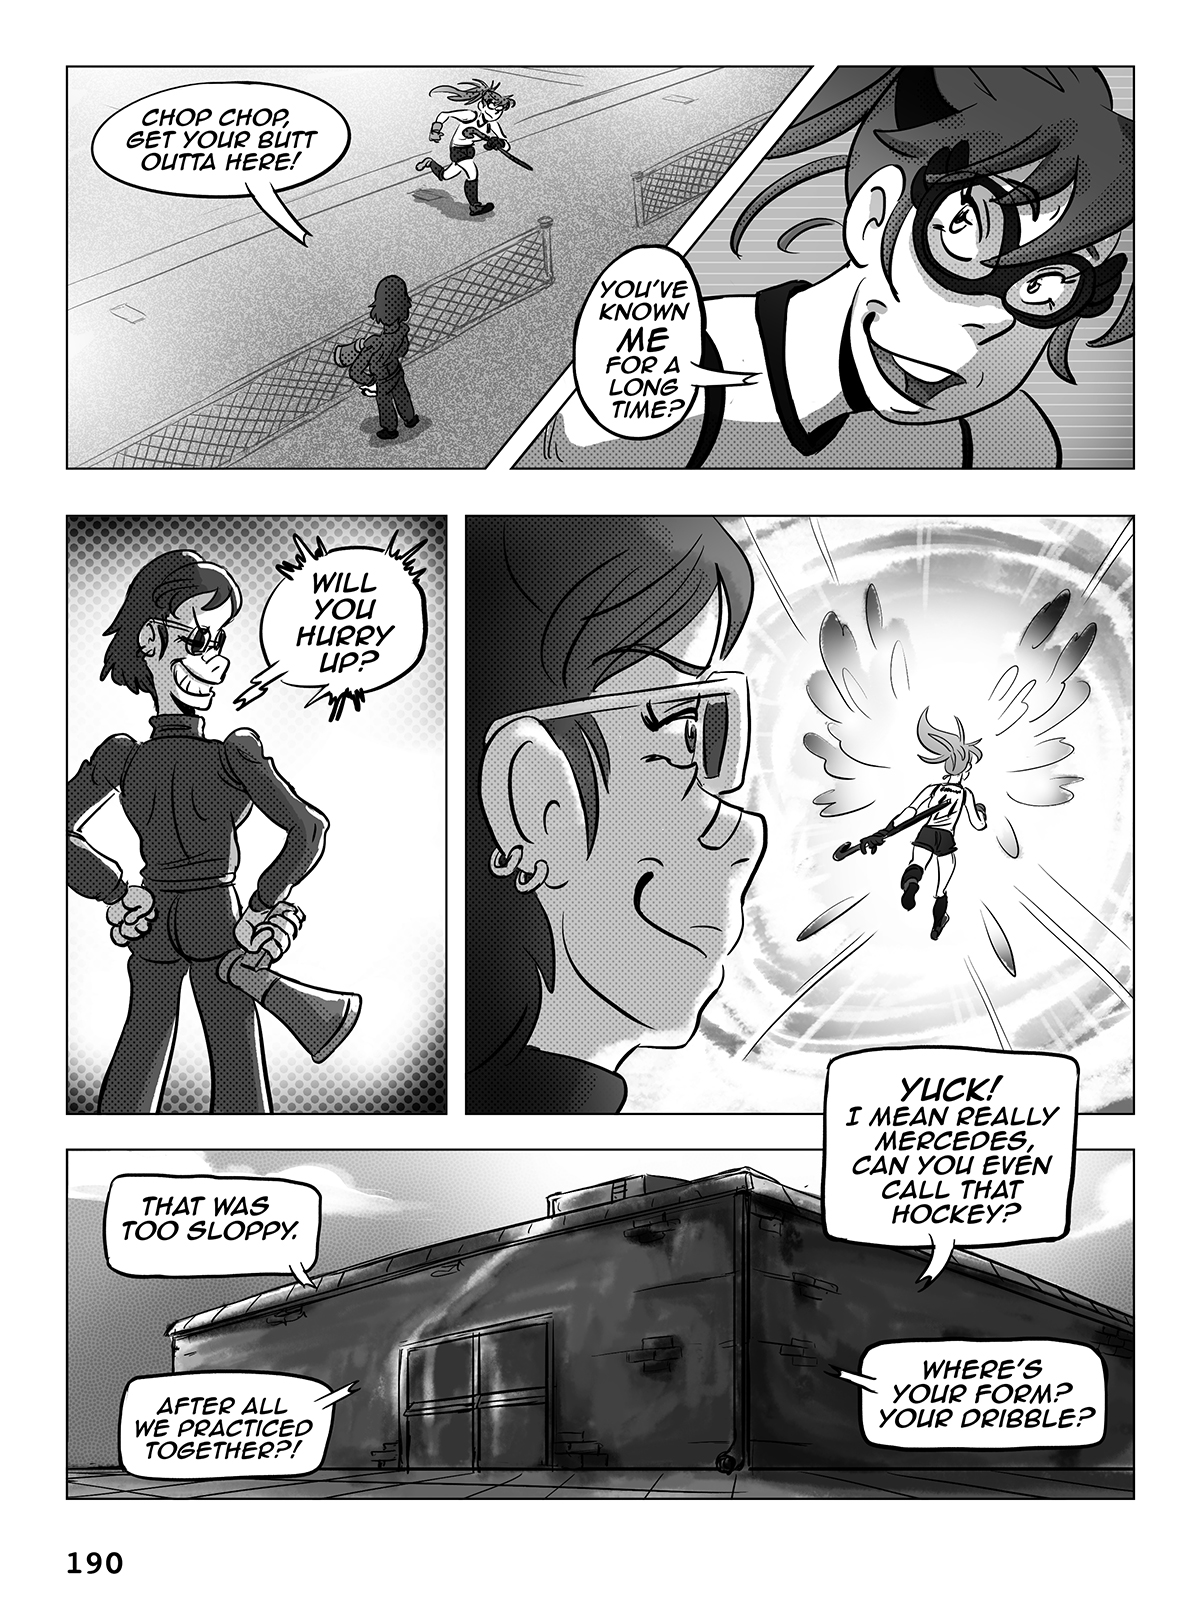 Hockey, Love, & GUTS! – Chapter 8 – Page 190